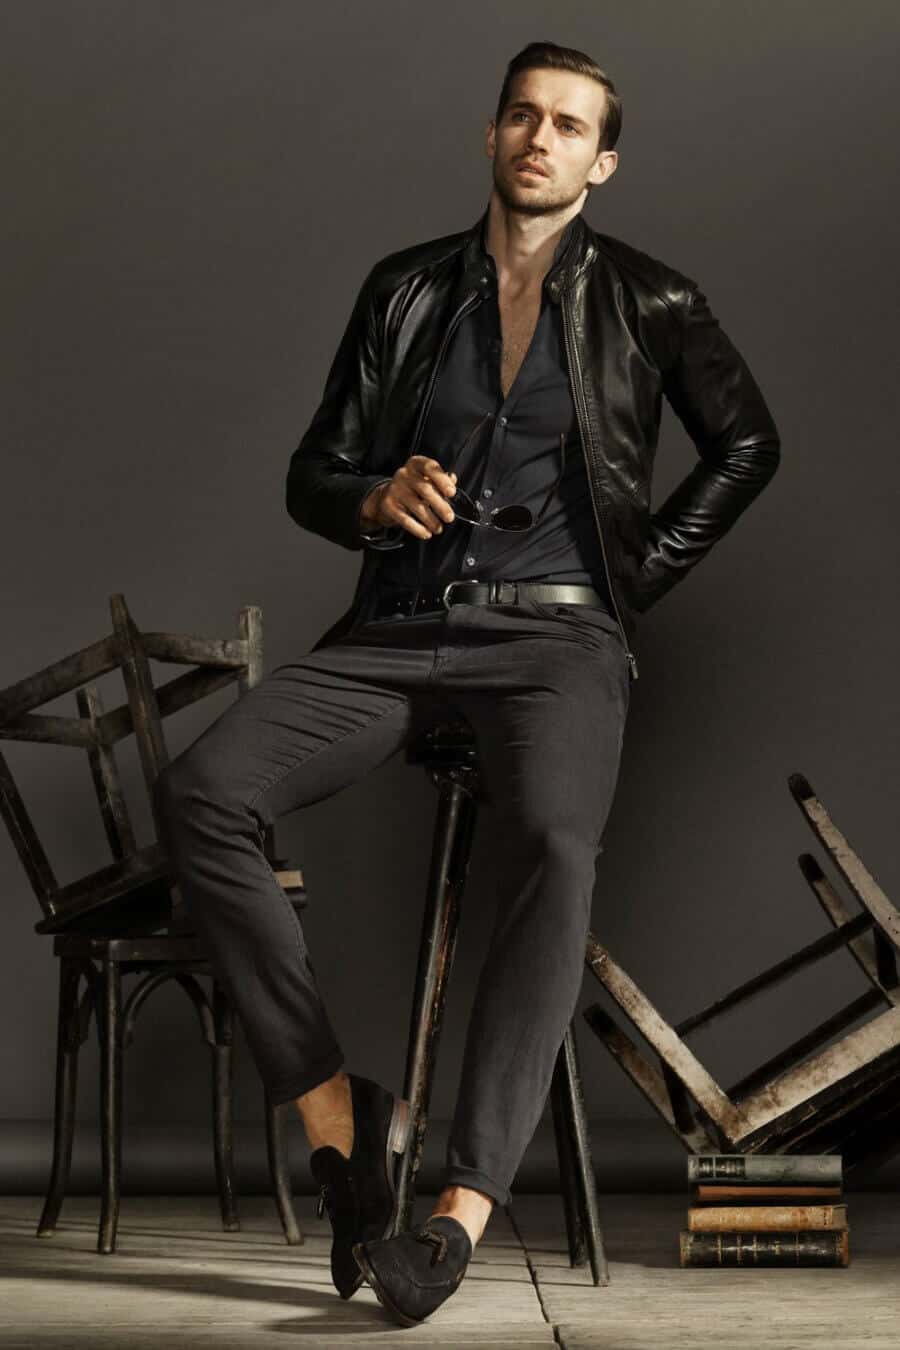 Men's slick all black outfit with black shirt, leather jacket, jeans and suede loafers